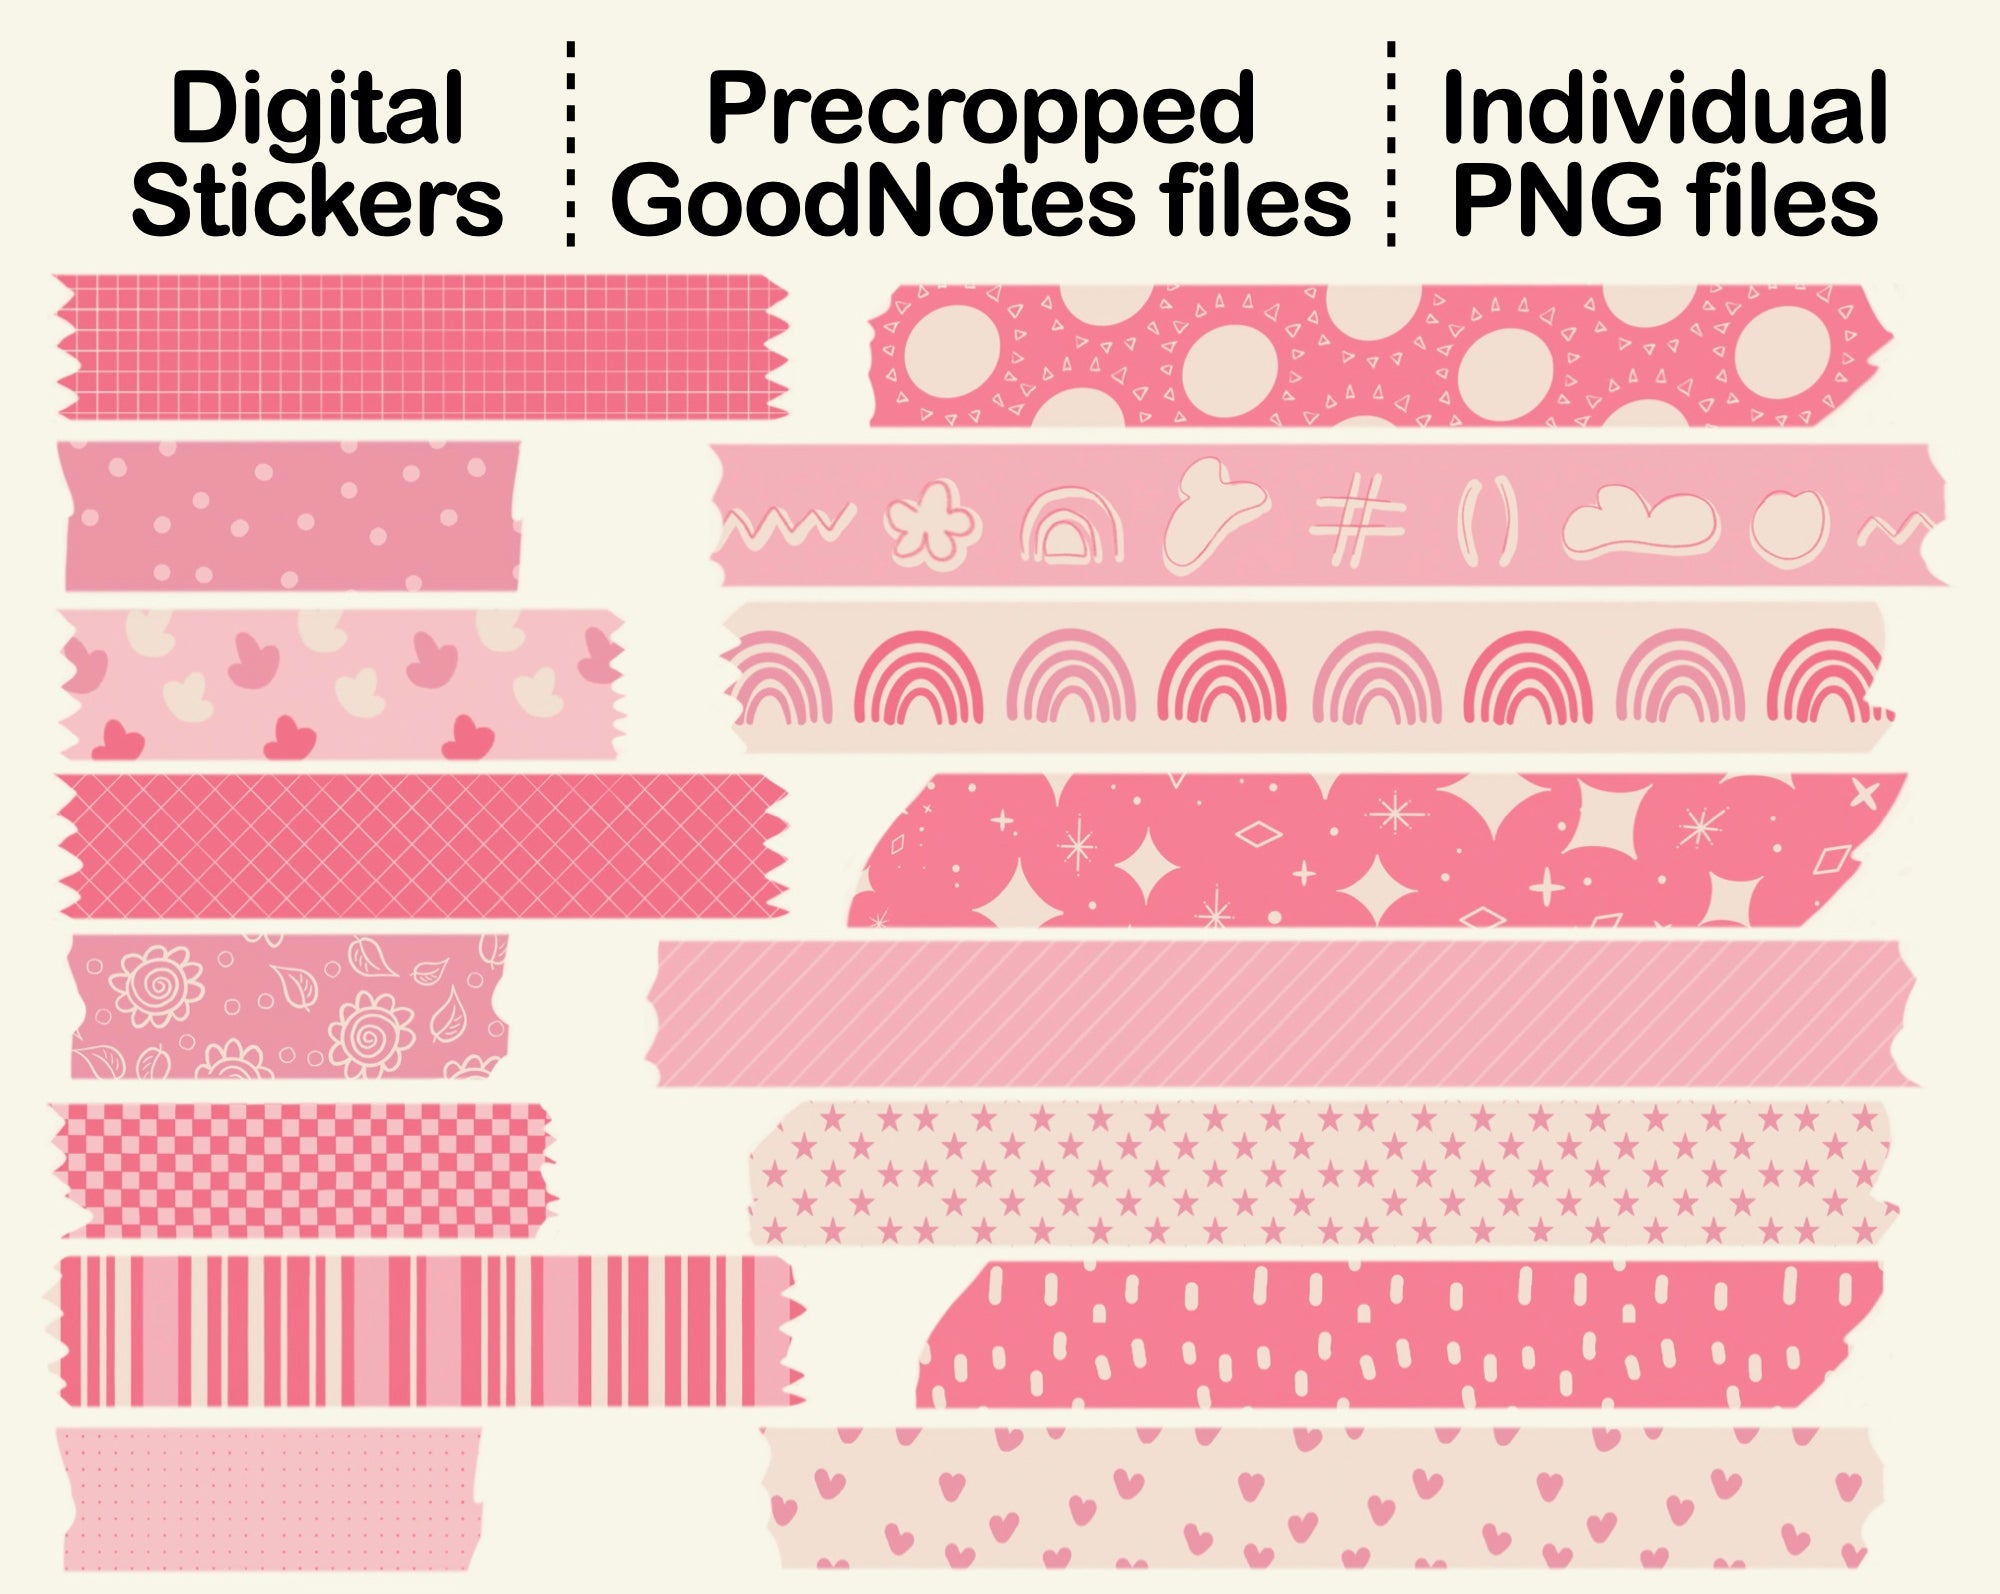 Pink Washi Tape Digital Stickers Pre-cropped Digital Stickers